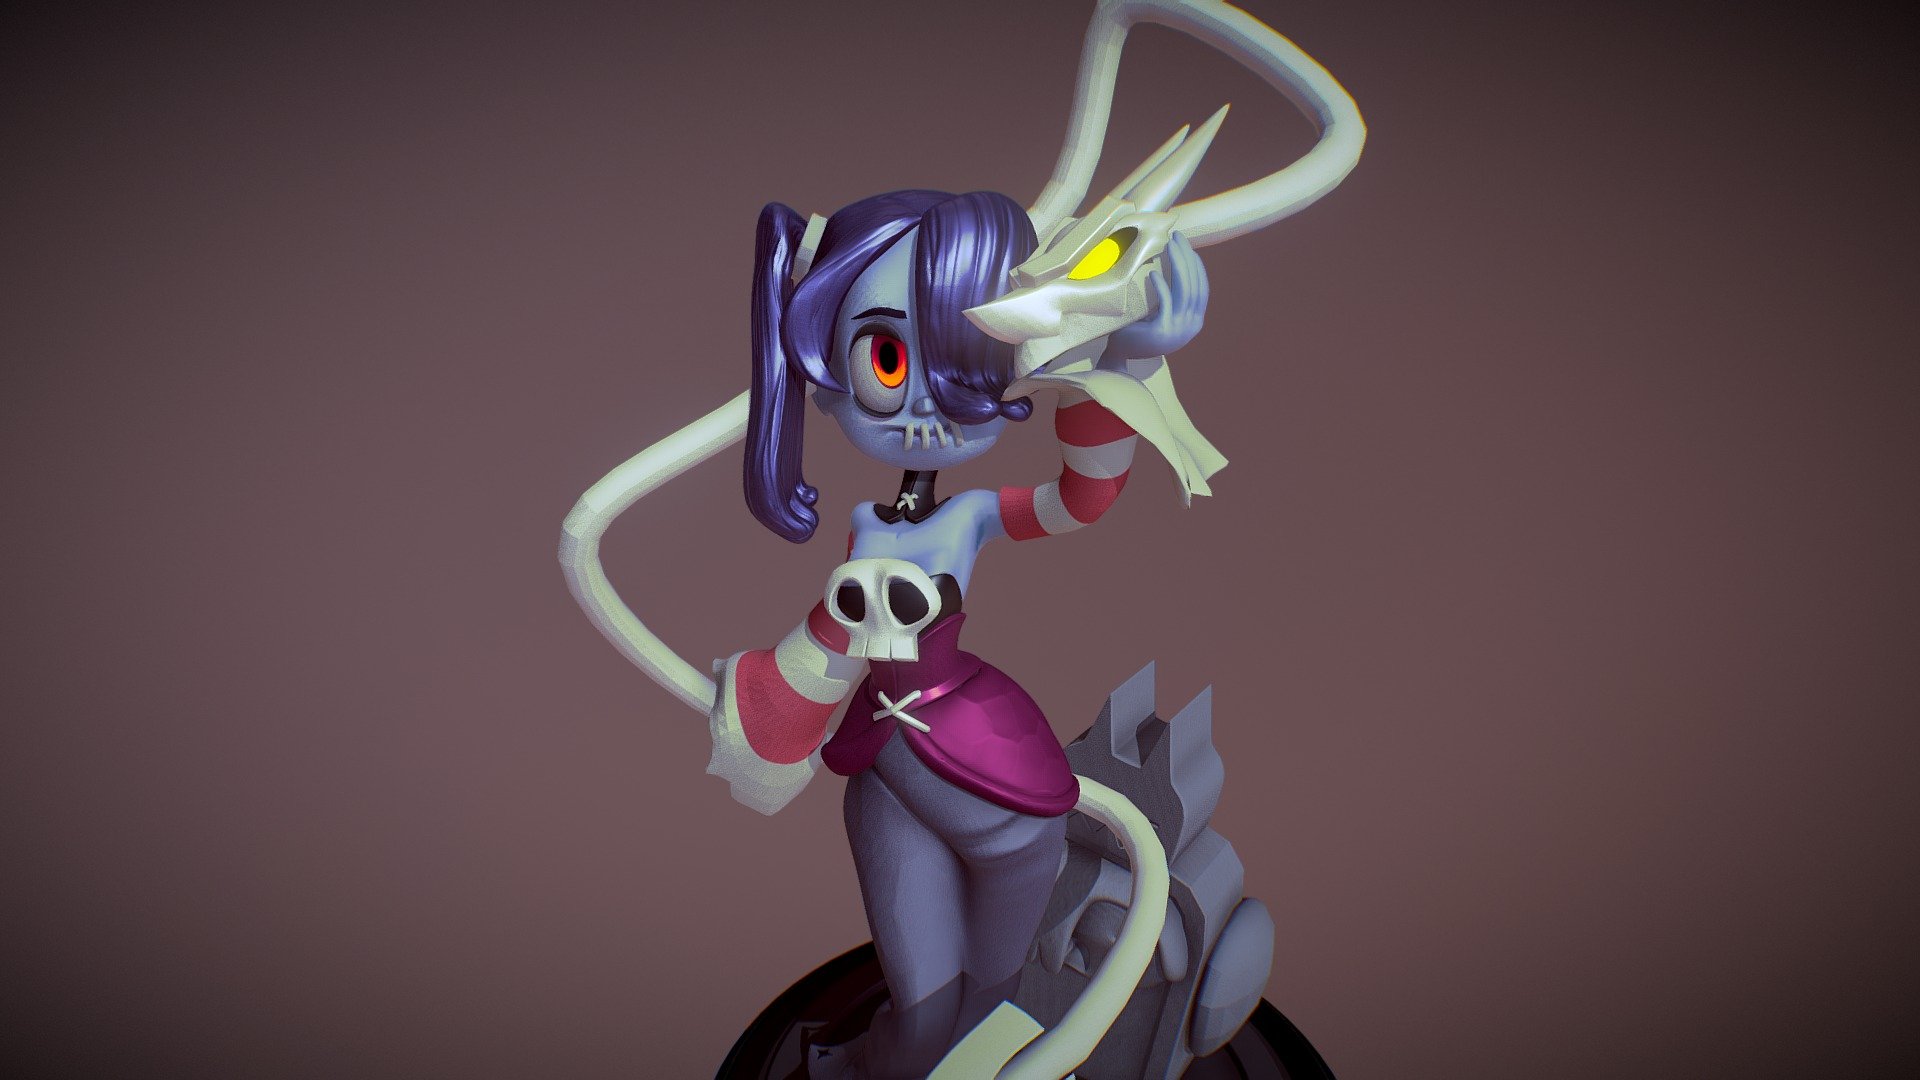 It's been a long time since I've made something 3D, and I had never modelled a human character before, so I thought a nice little fan art would be a nice addition to my portfolio.

I really love Skullgirls, the characters are really well designed, and  the animations are absolutely gorgeous and help fleshing out the personality of each fighter. It's one of the best fighting games out there for me, and Squigly is my favourite character.

Skullgirls belongs to Lab Zero, and huge thanks to them for having produced this wonderful game! - Skullgirls fan art - Squigly - 3D model by TheFraggDog 3d model